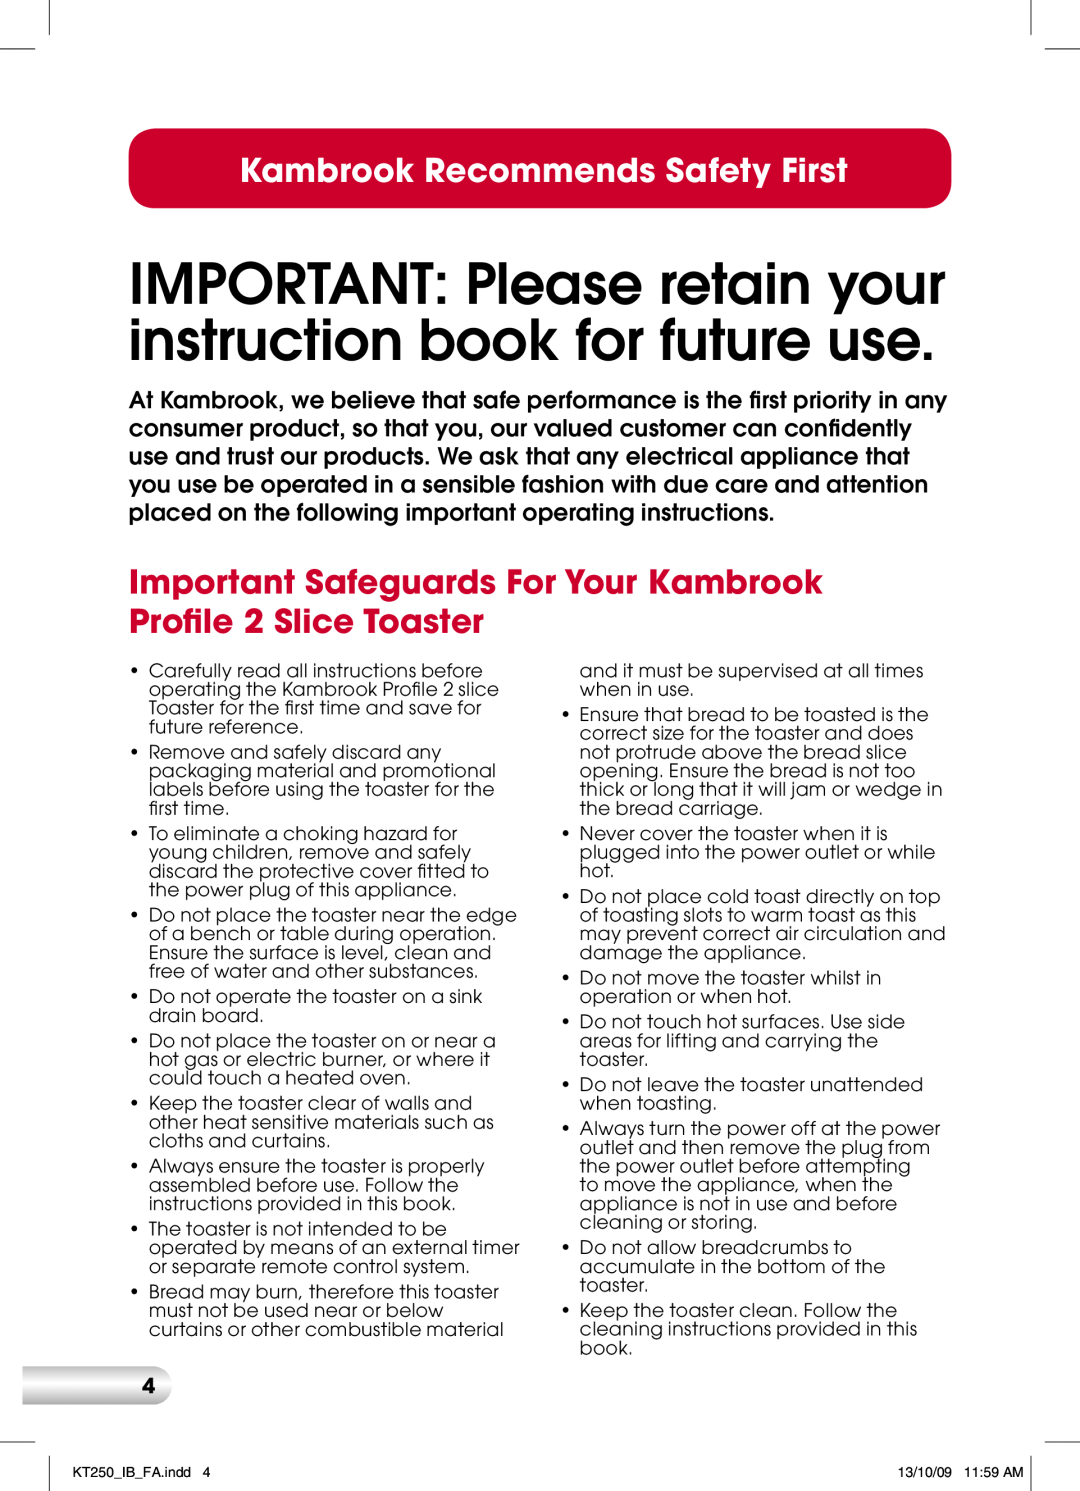 Kambrook KT250 manual Kambrook Recommends Safety First 